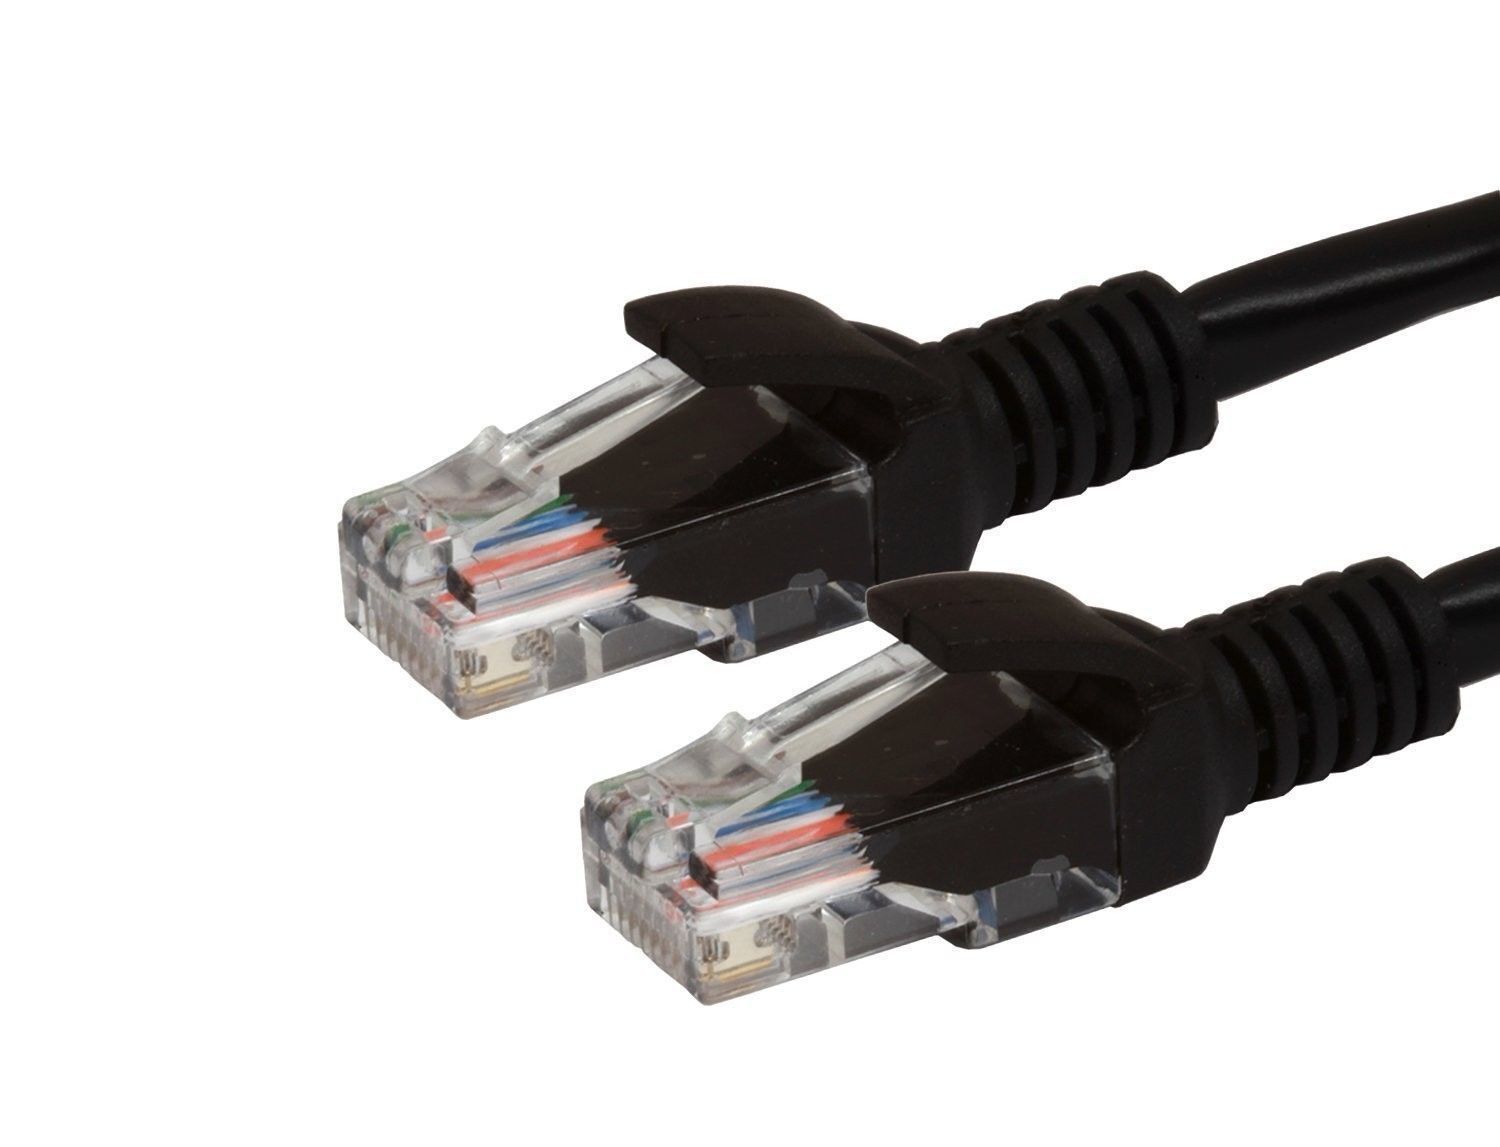 BLOWOUT SALE CAT5E Patch Cable 3ft or 6ft Network Cable LAN Lot of 50-100